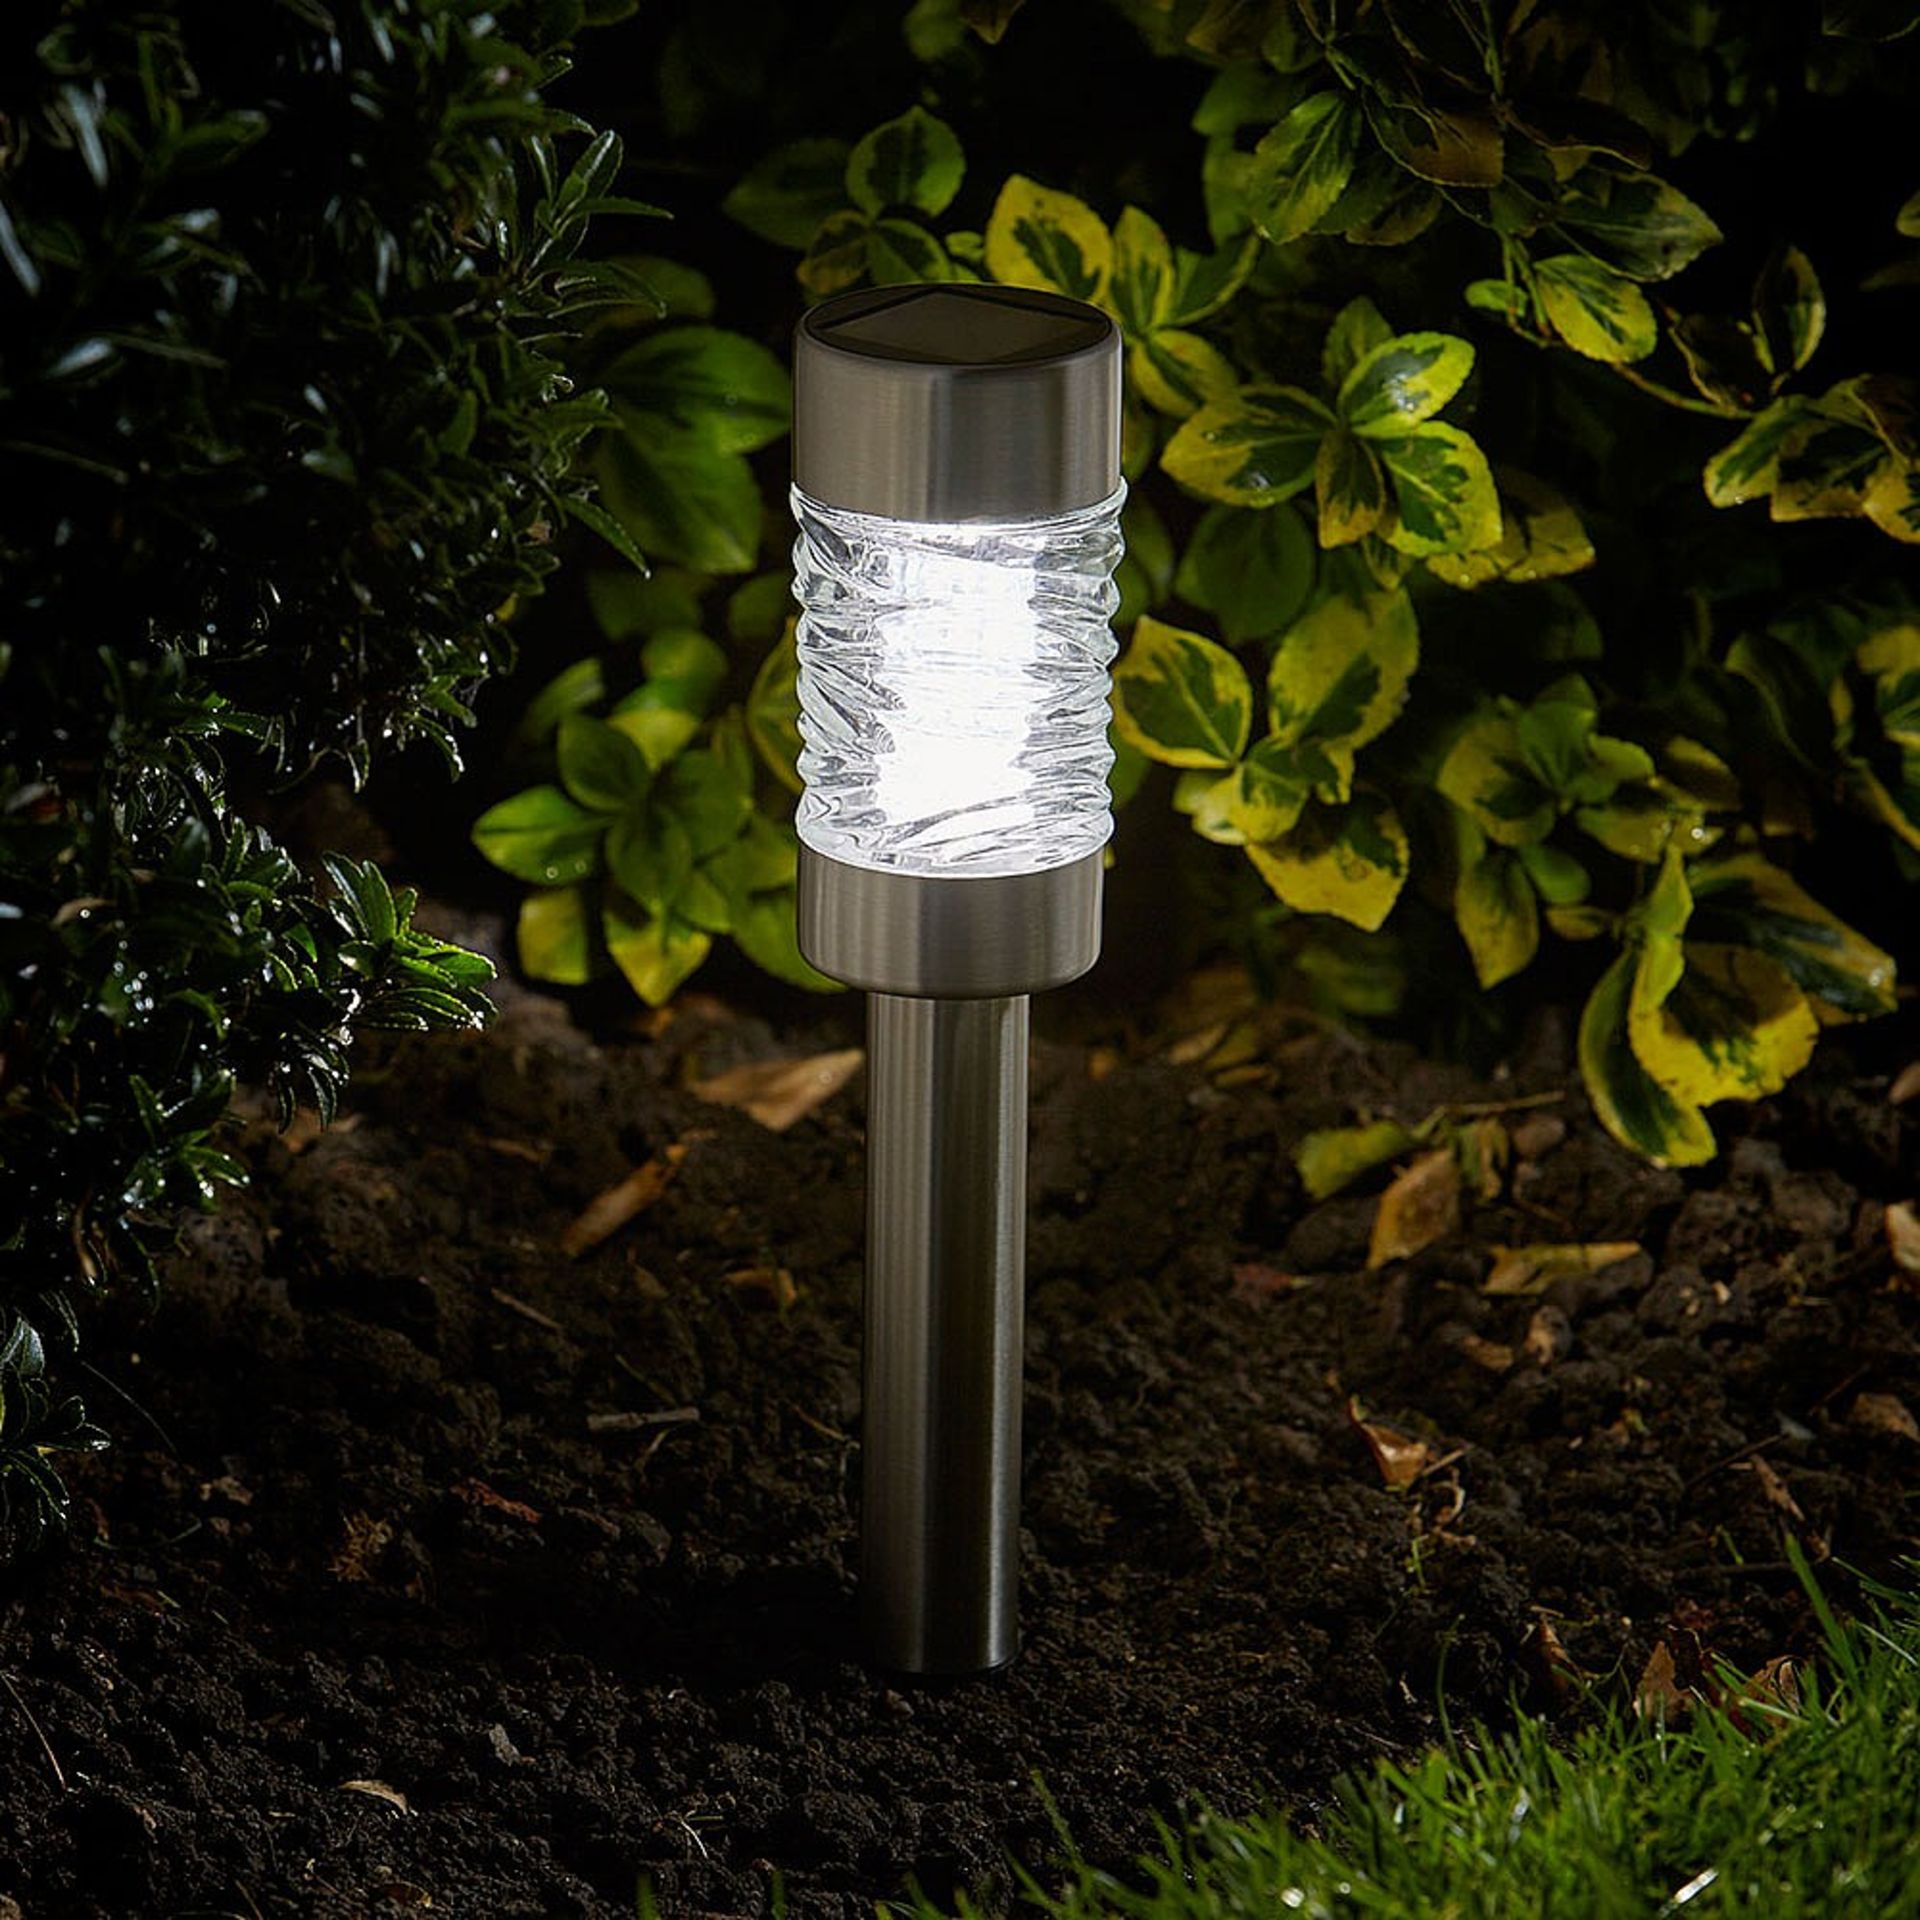 NEW (Z125) Solar Stake Light. Brushed stainless steel finish, with glass lens 3 lumen output, ...